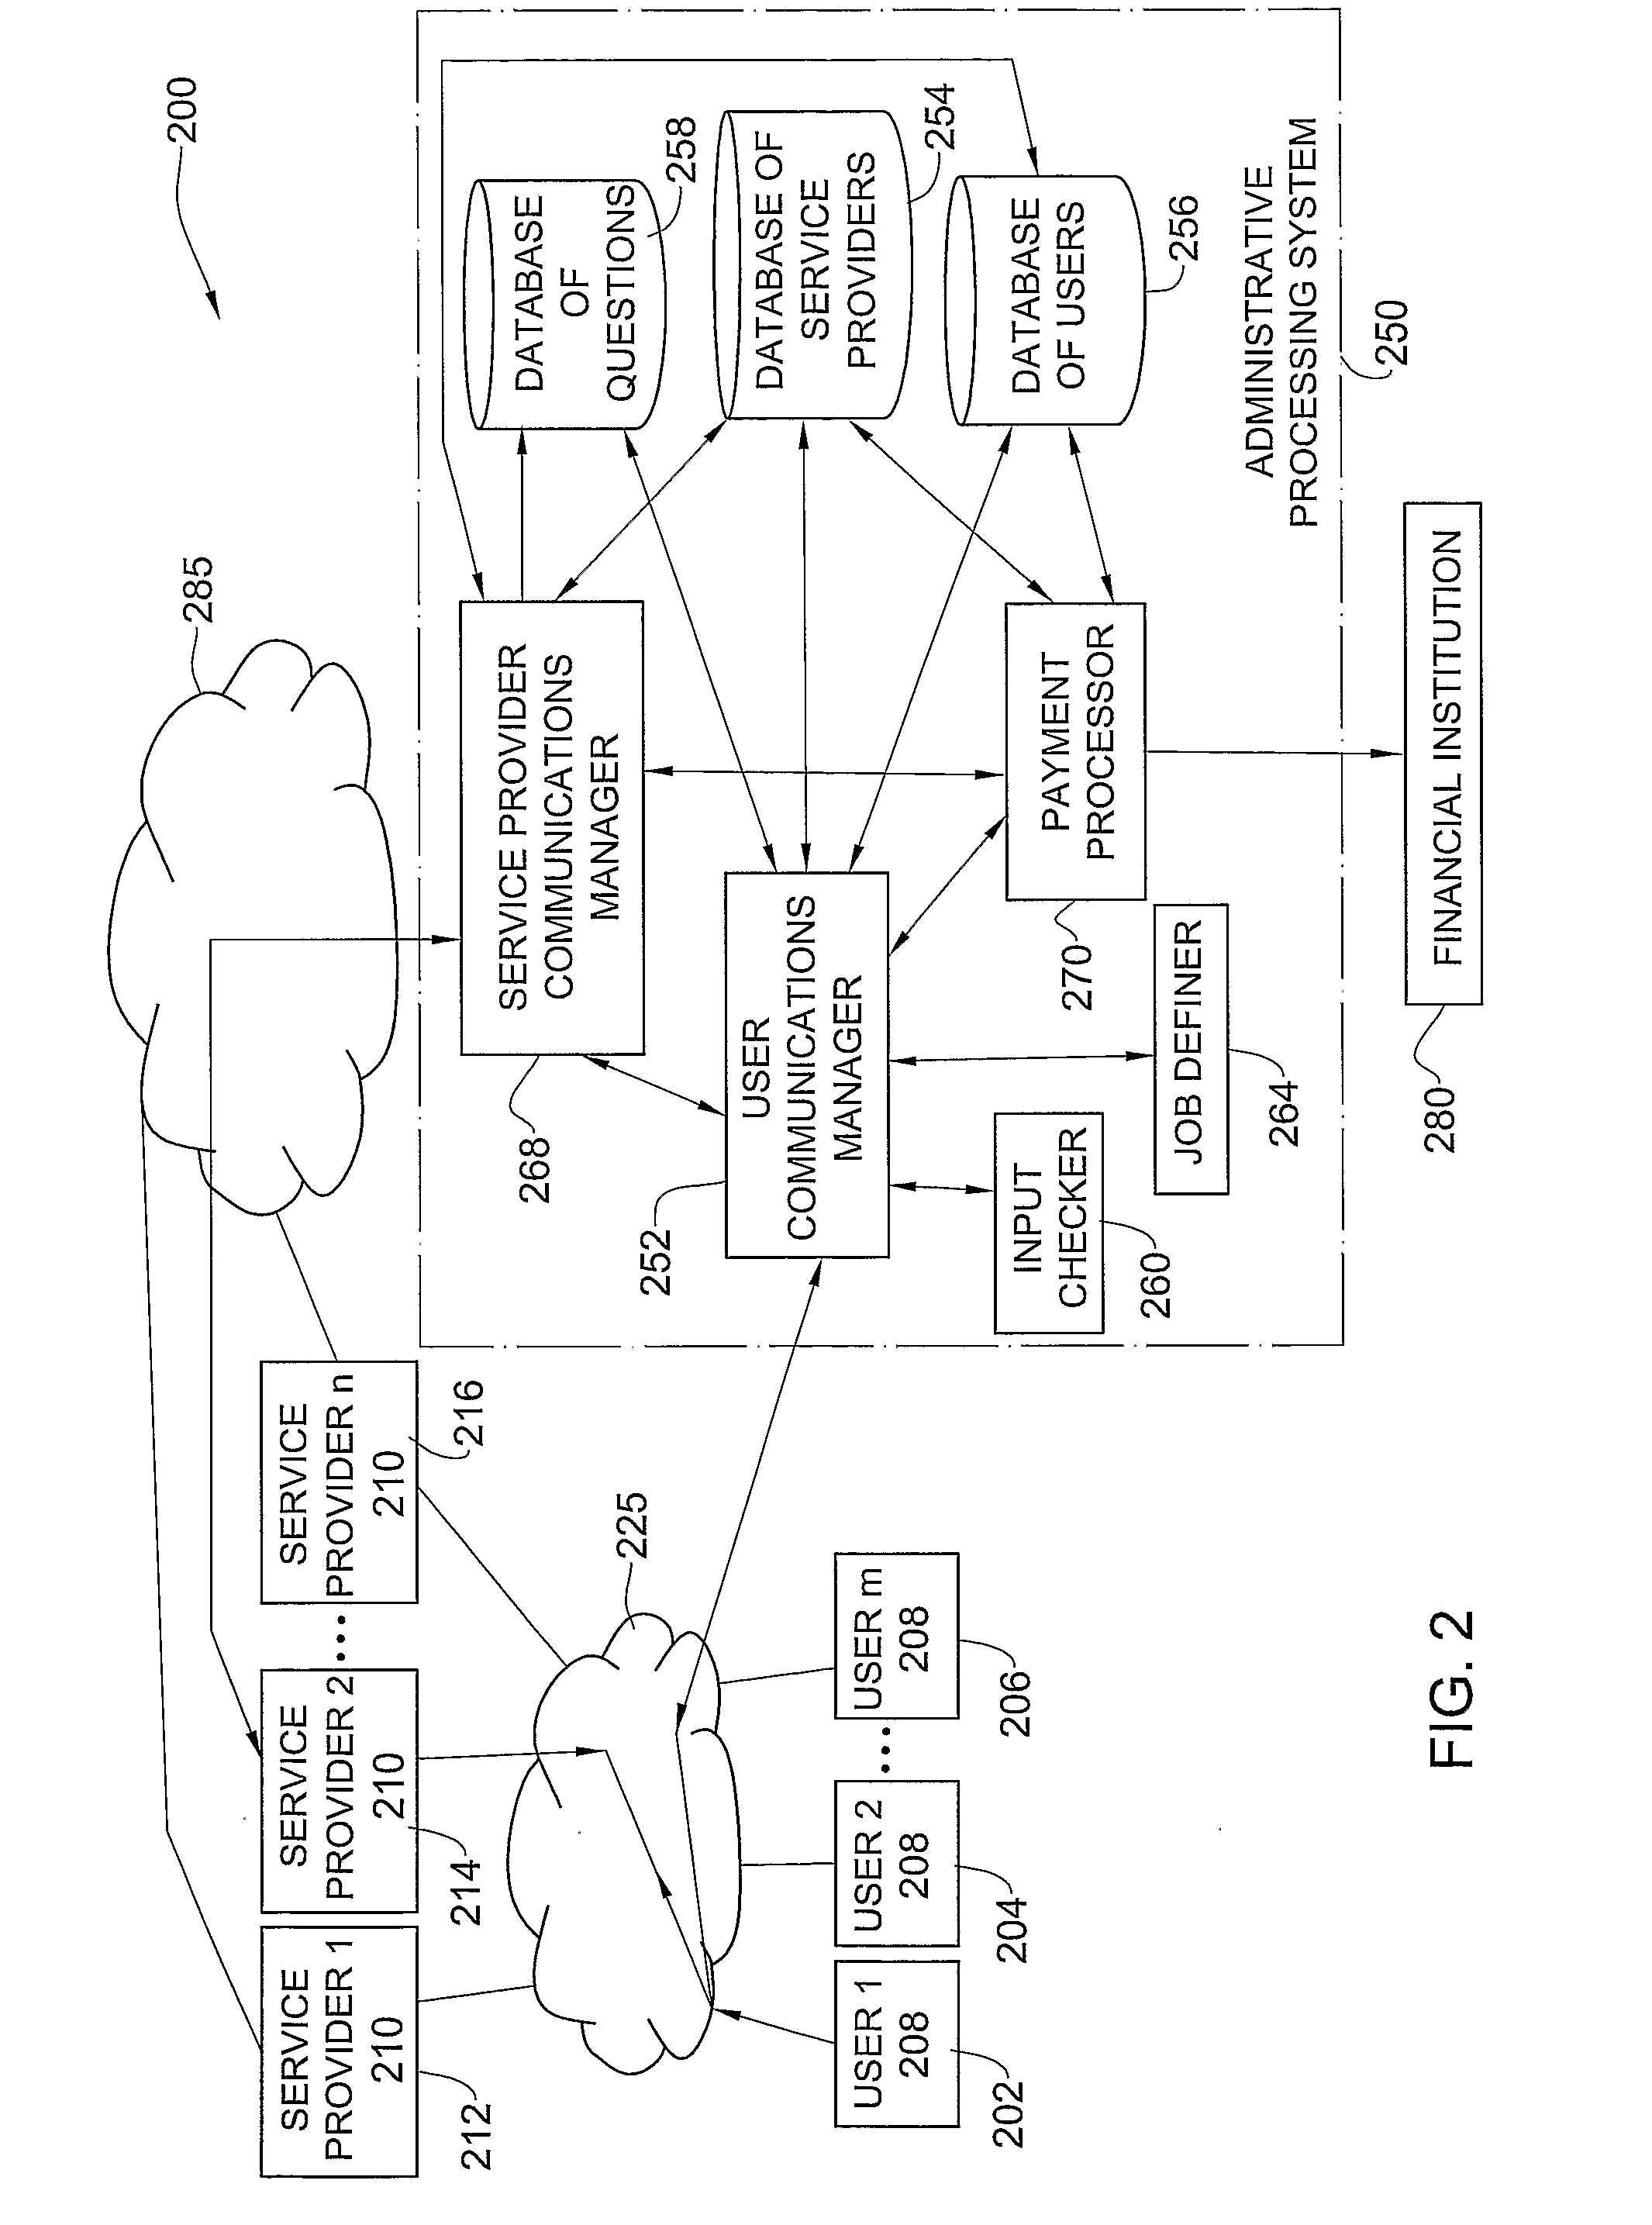 Method And System For Provision Of Personalized Service